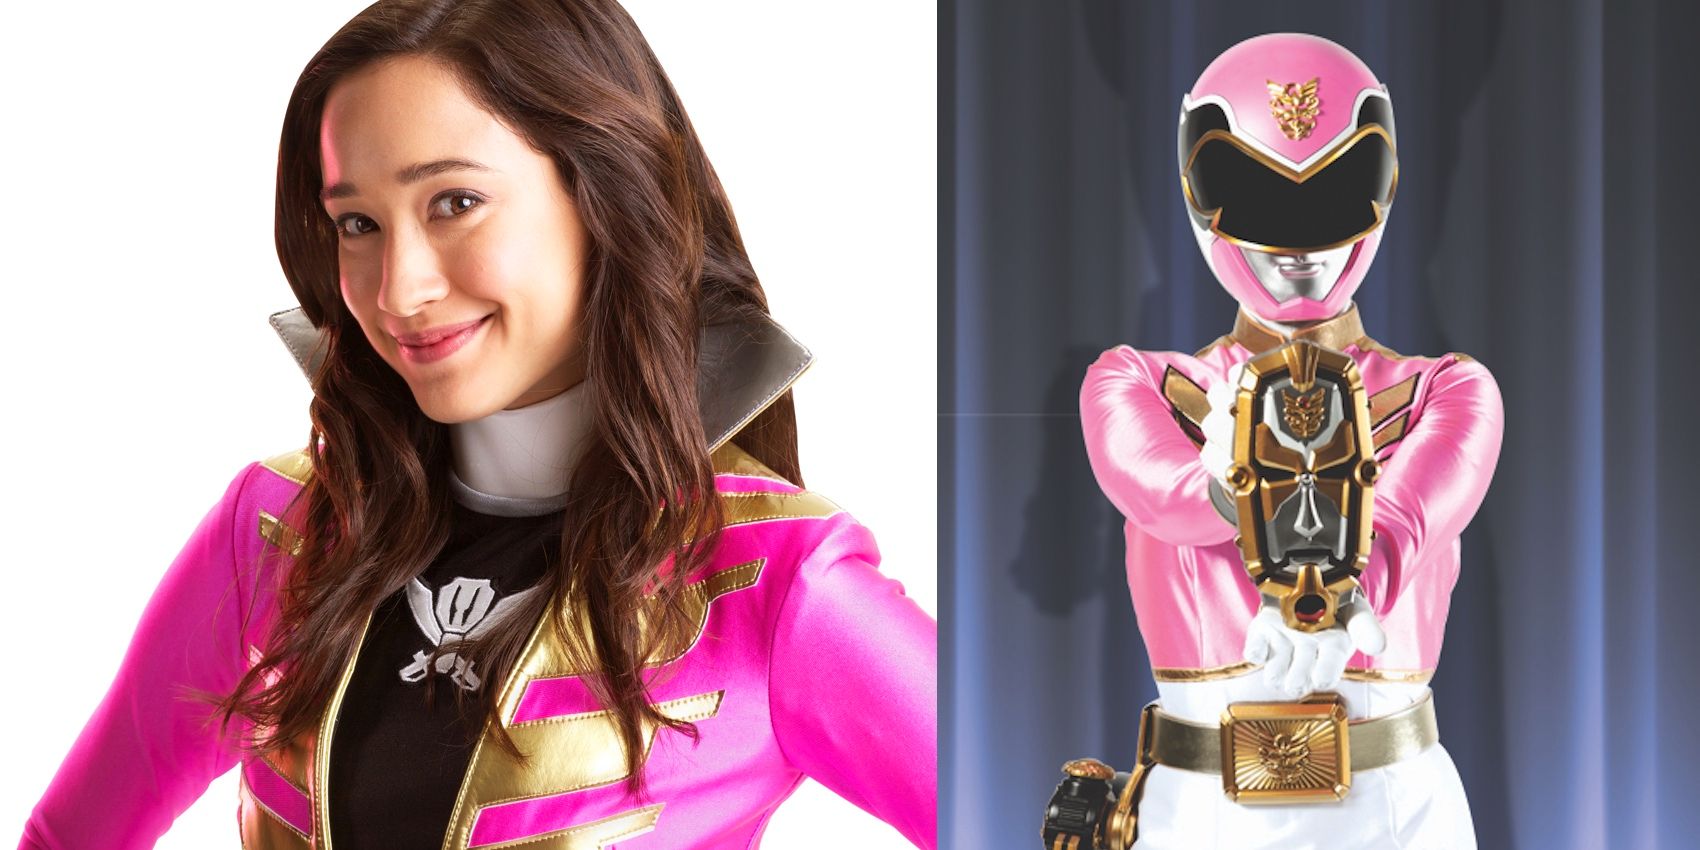 Power Rangers Every Pink Ranger In The Series, Ranked Worst To Best